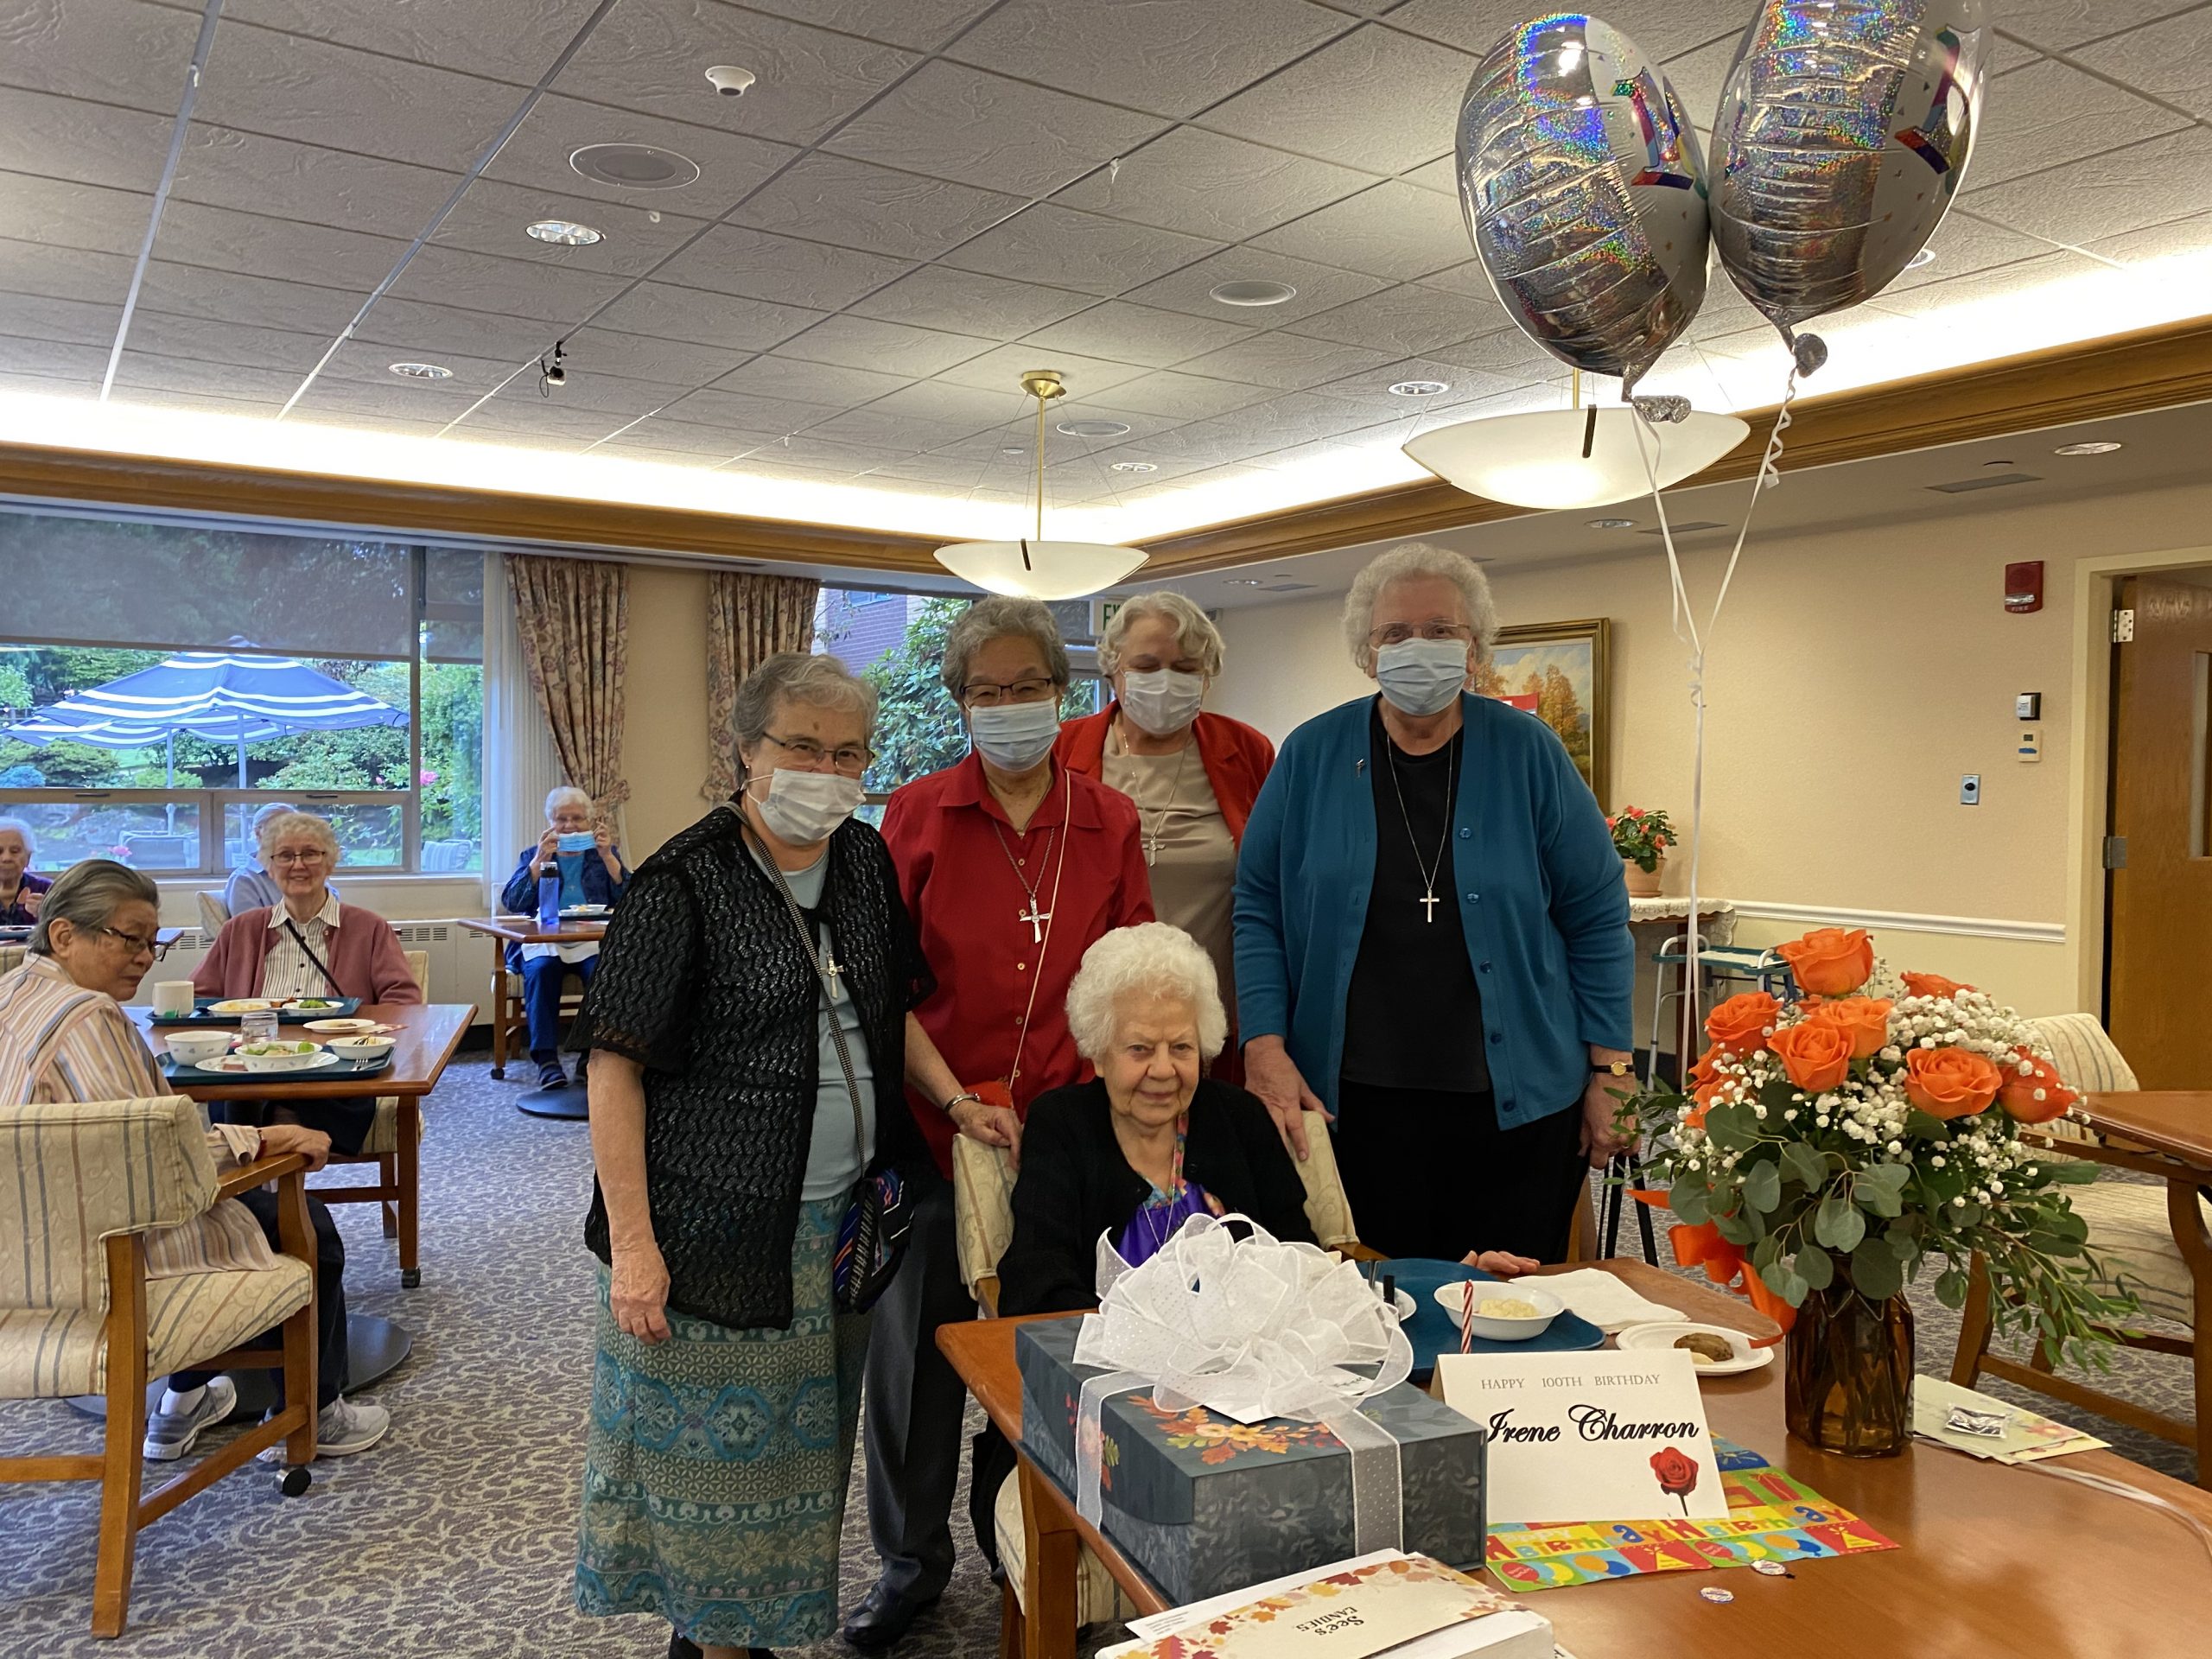 Sister Irene Charron with sisters, cake and gifts on 100th birthday.